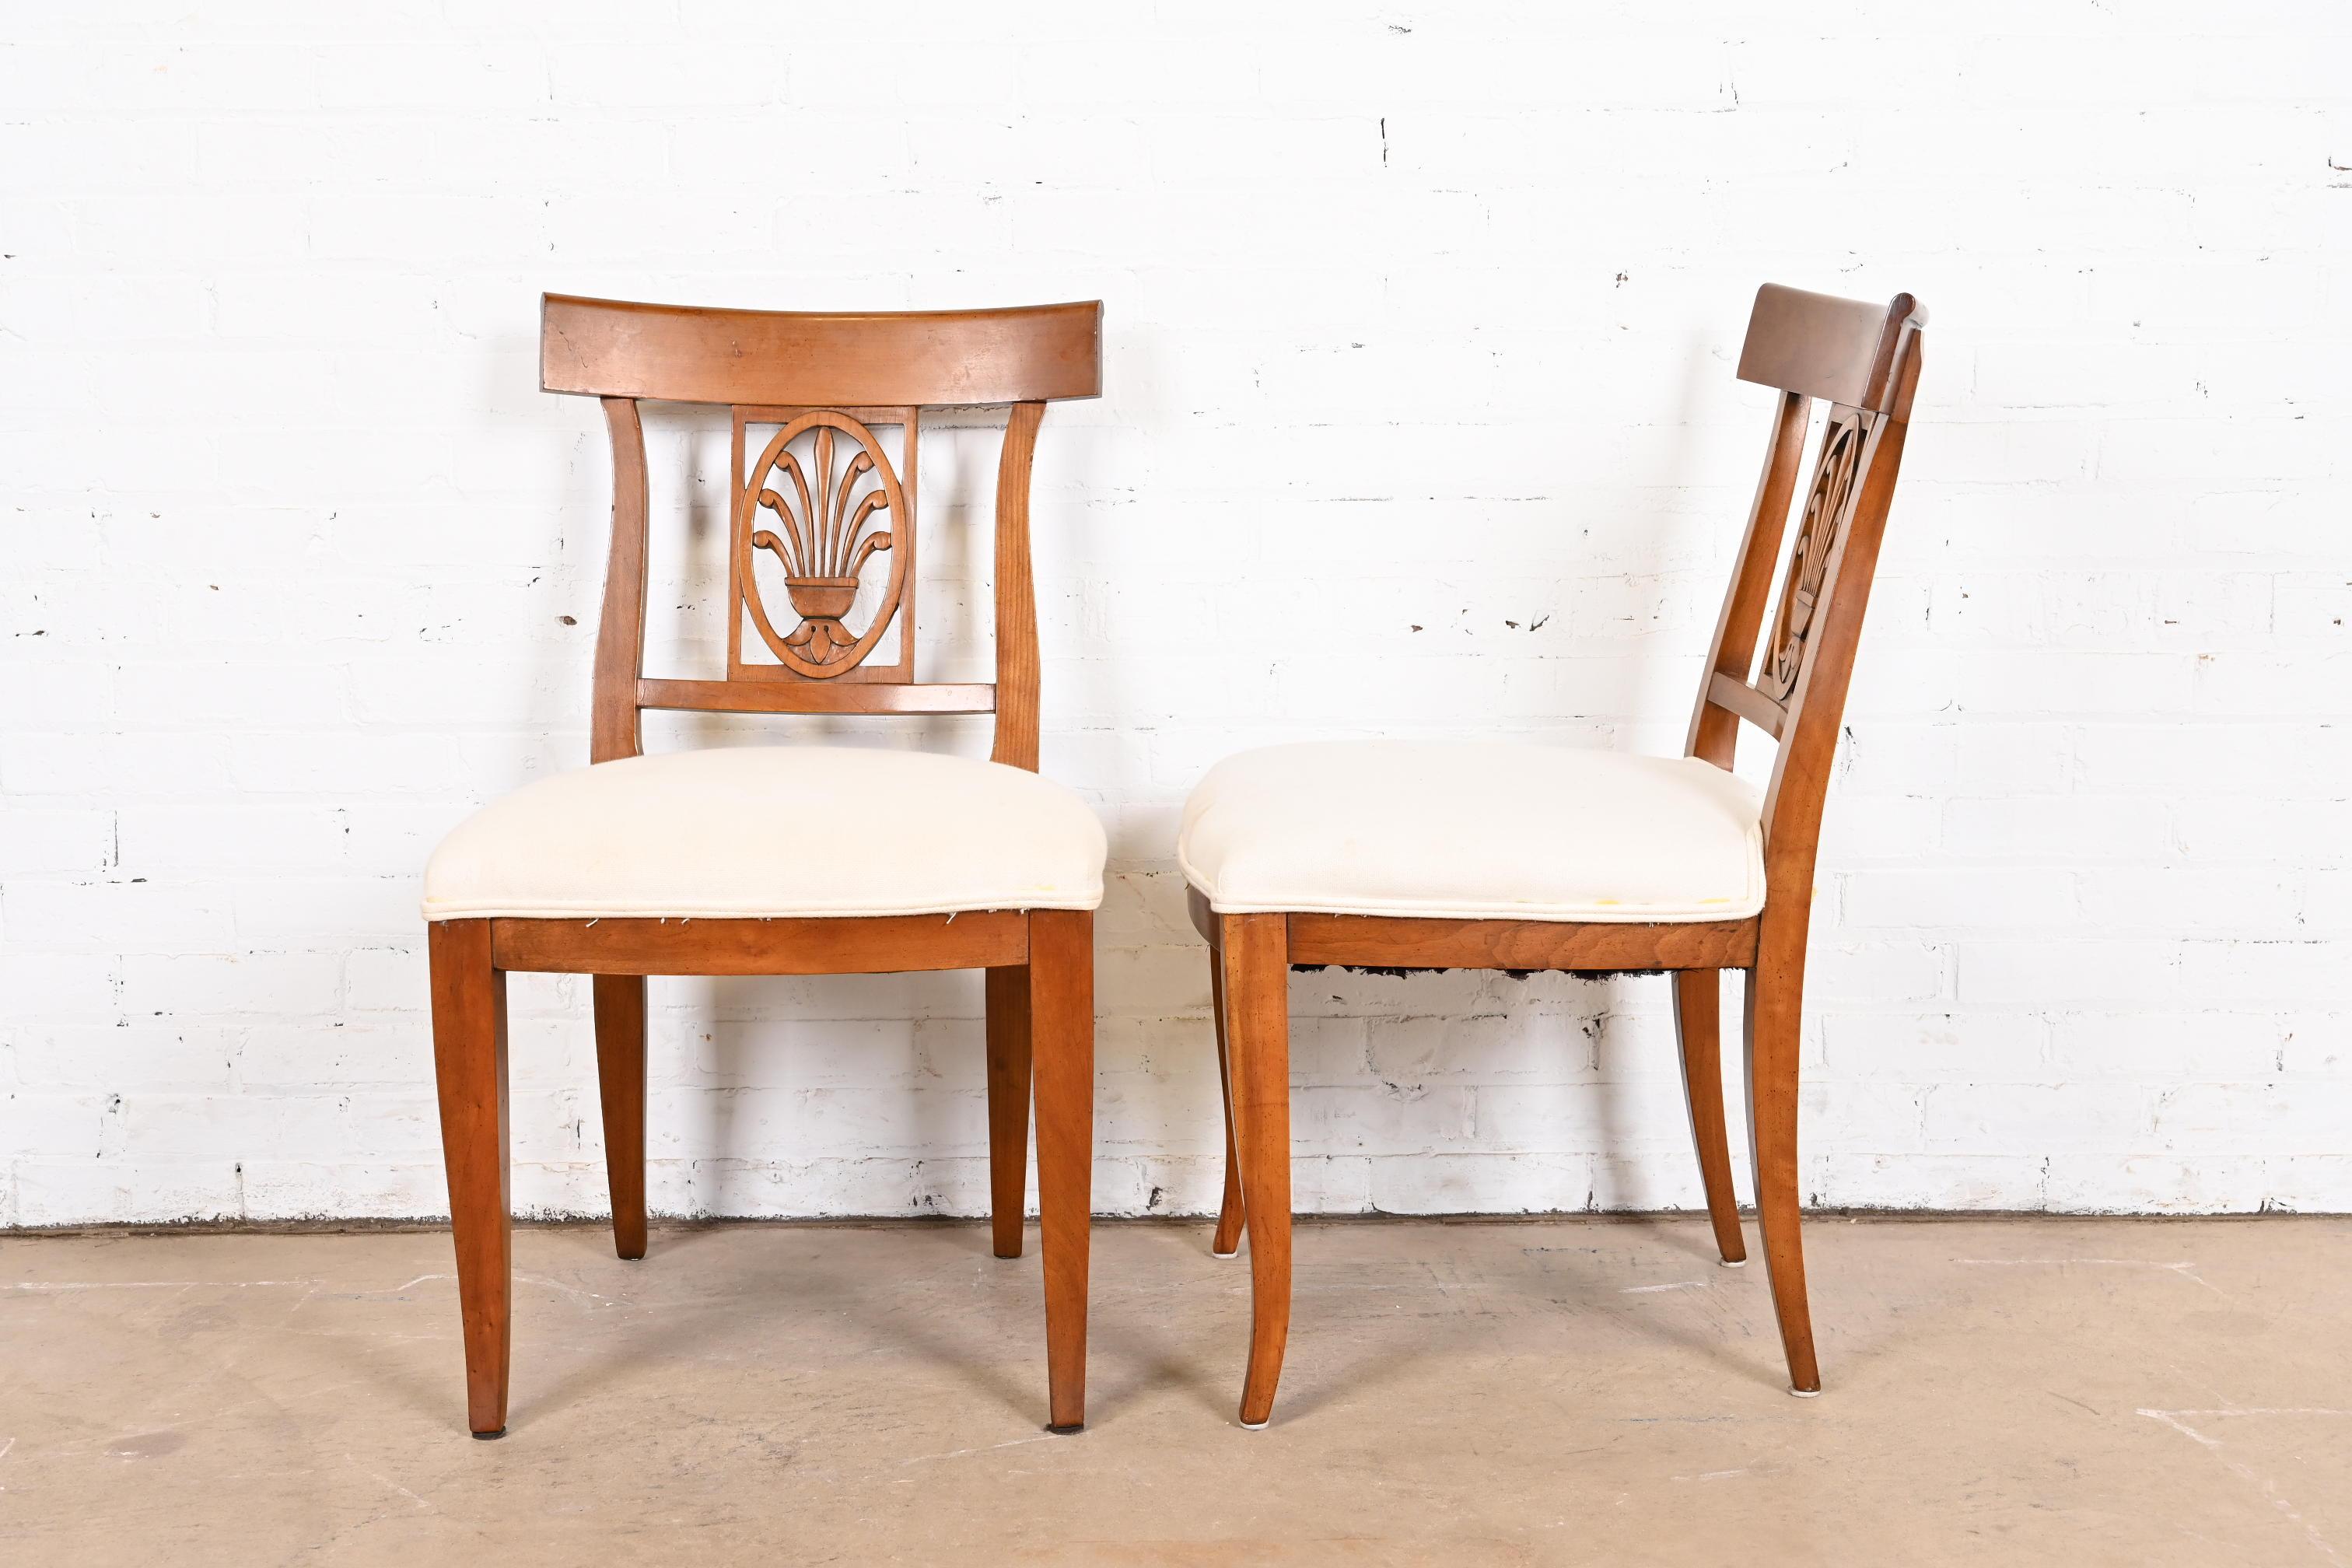 Upholstery Kindel Furniture Regency Carved Fruitwood Dining Chairs, Set of Four For Sale